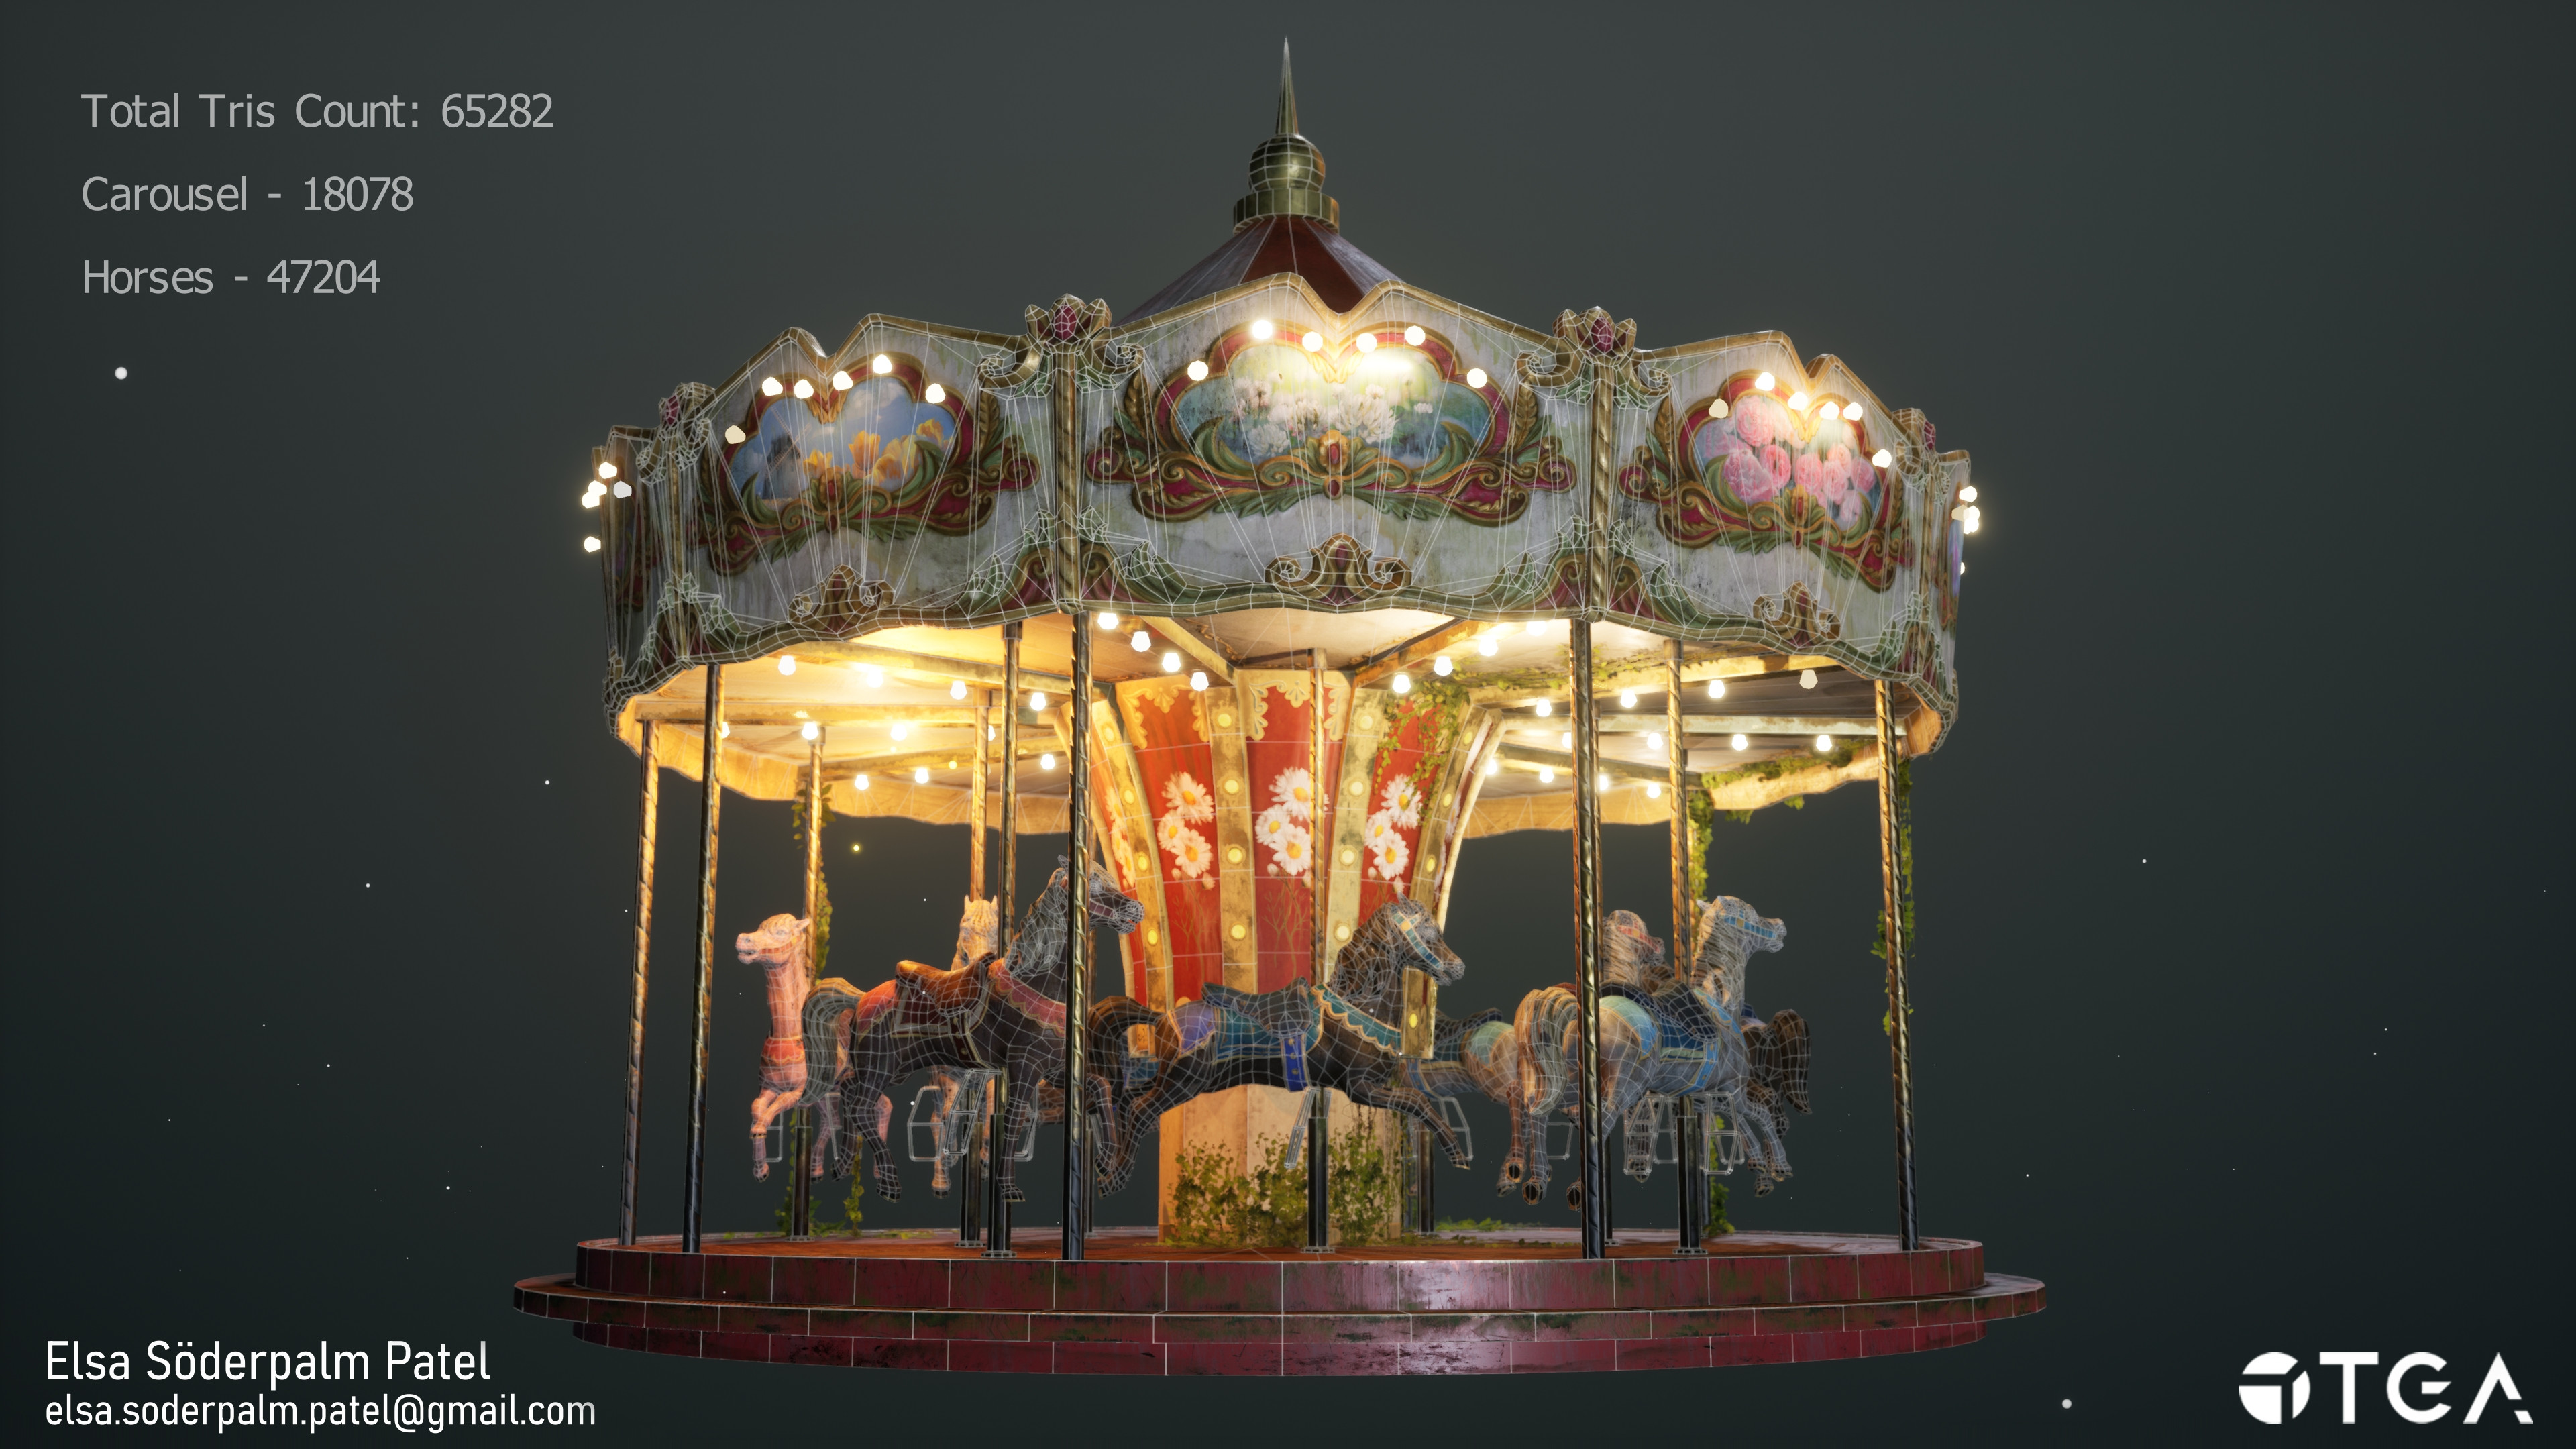 Total tris count is 65282 tris.
The carousel shell cost 18078 tris and all the carousel horses and their poles cost 47204 together.